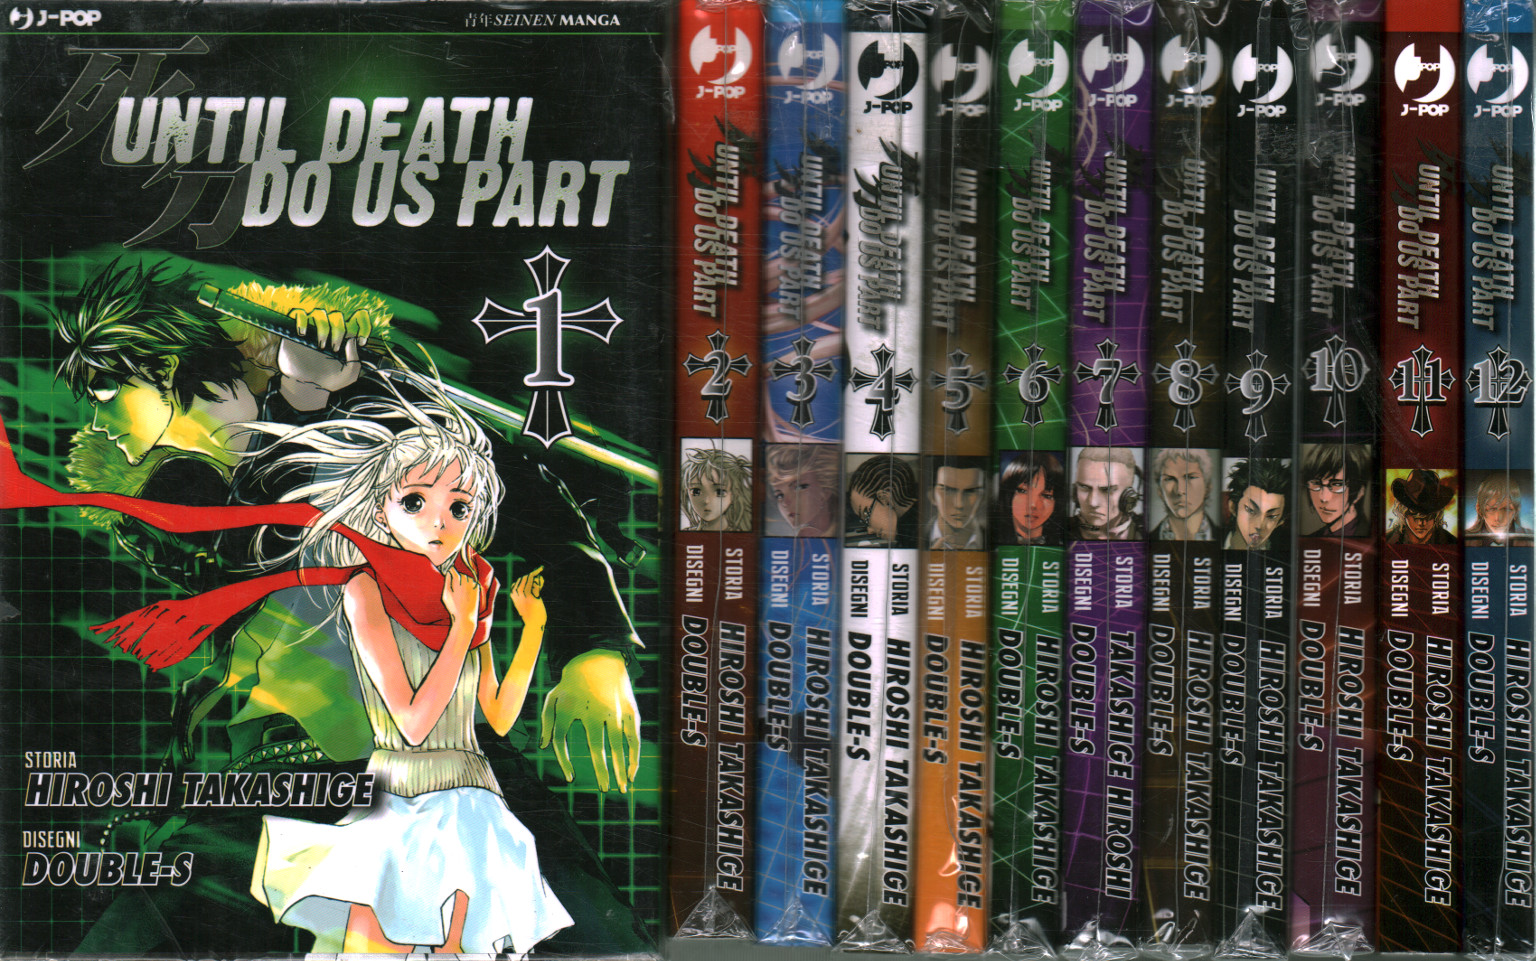 Until death do us part. Complete Sequence (24 Volu, Hiroshi Takashige Double-S